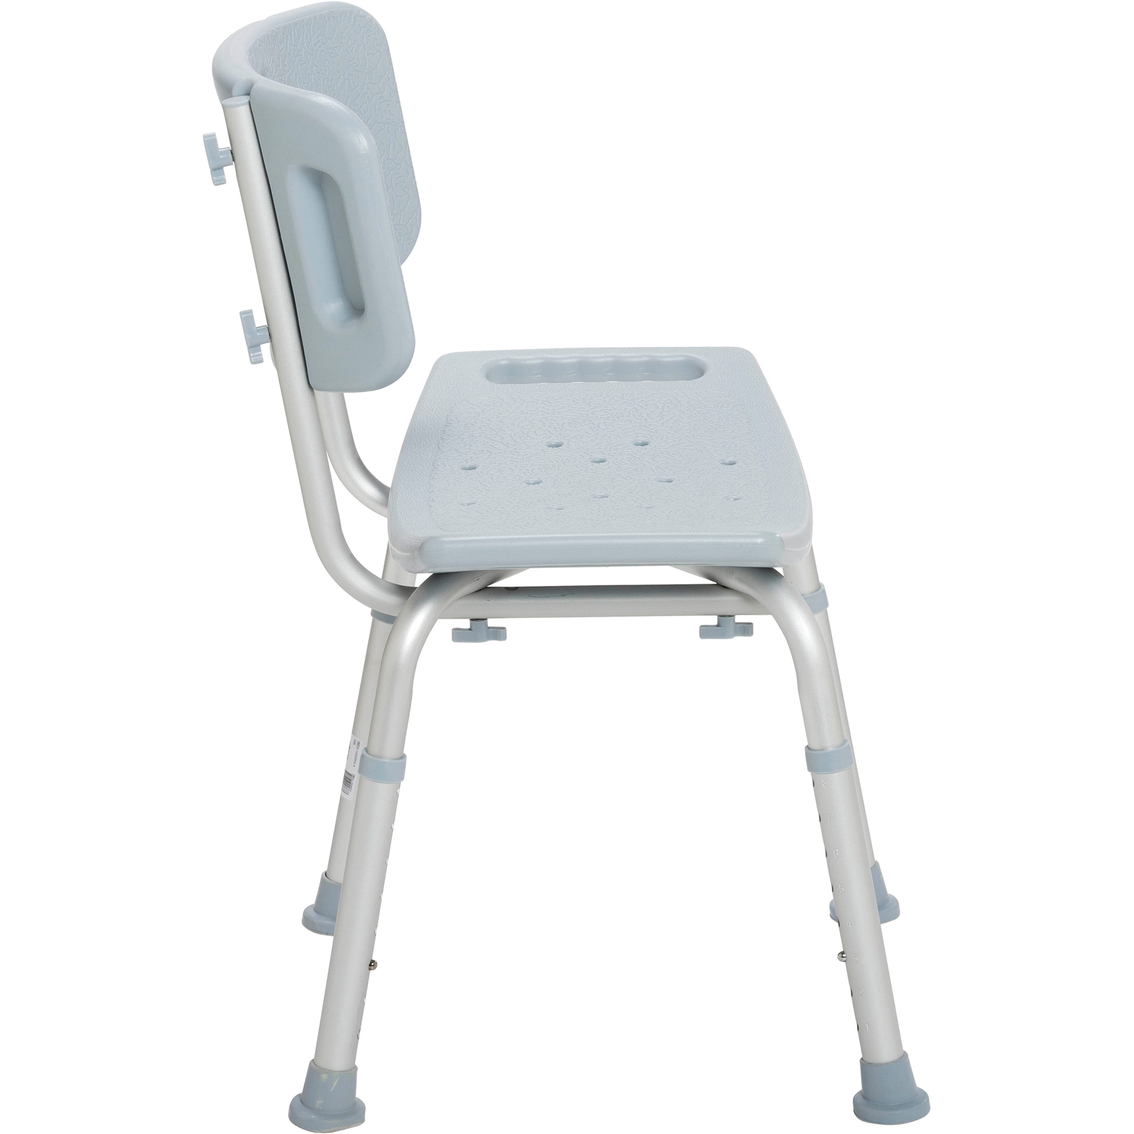 Drive Medical Bathroom Safety Shower Tub Bench Chair with Back - Image 4 of 4